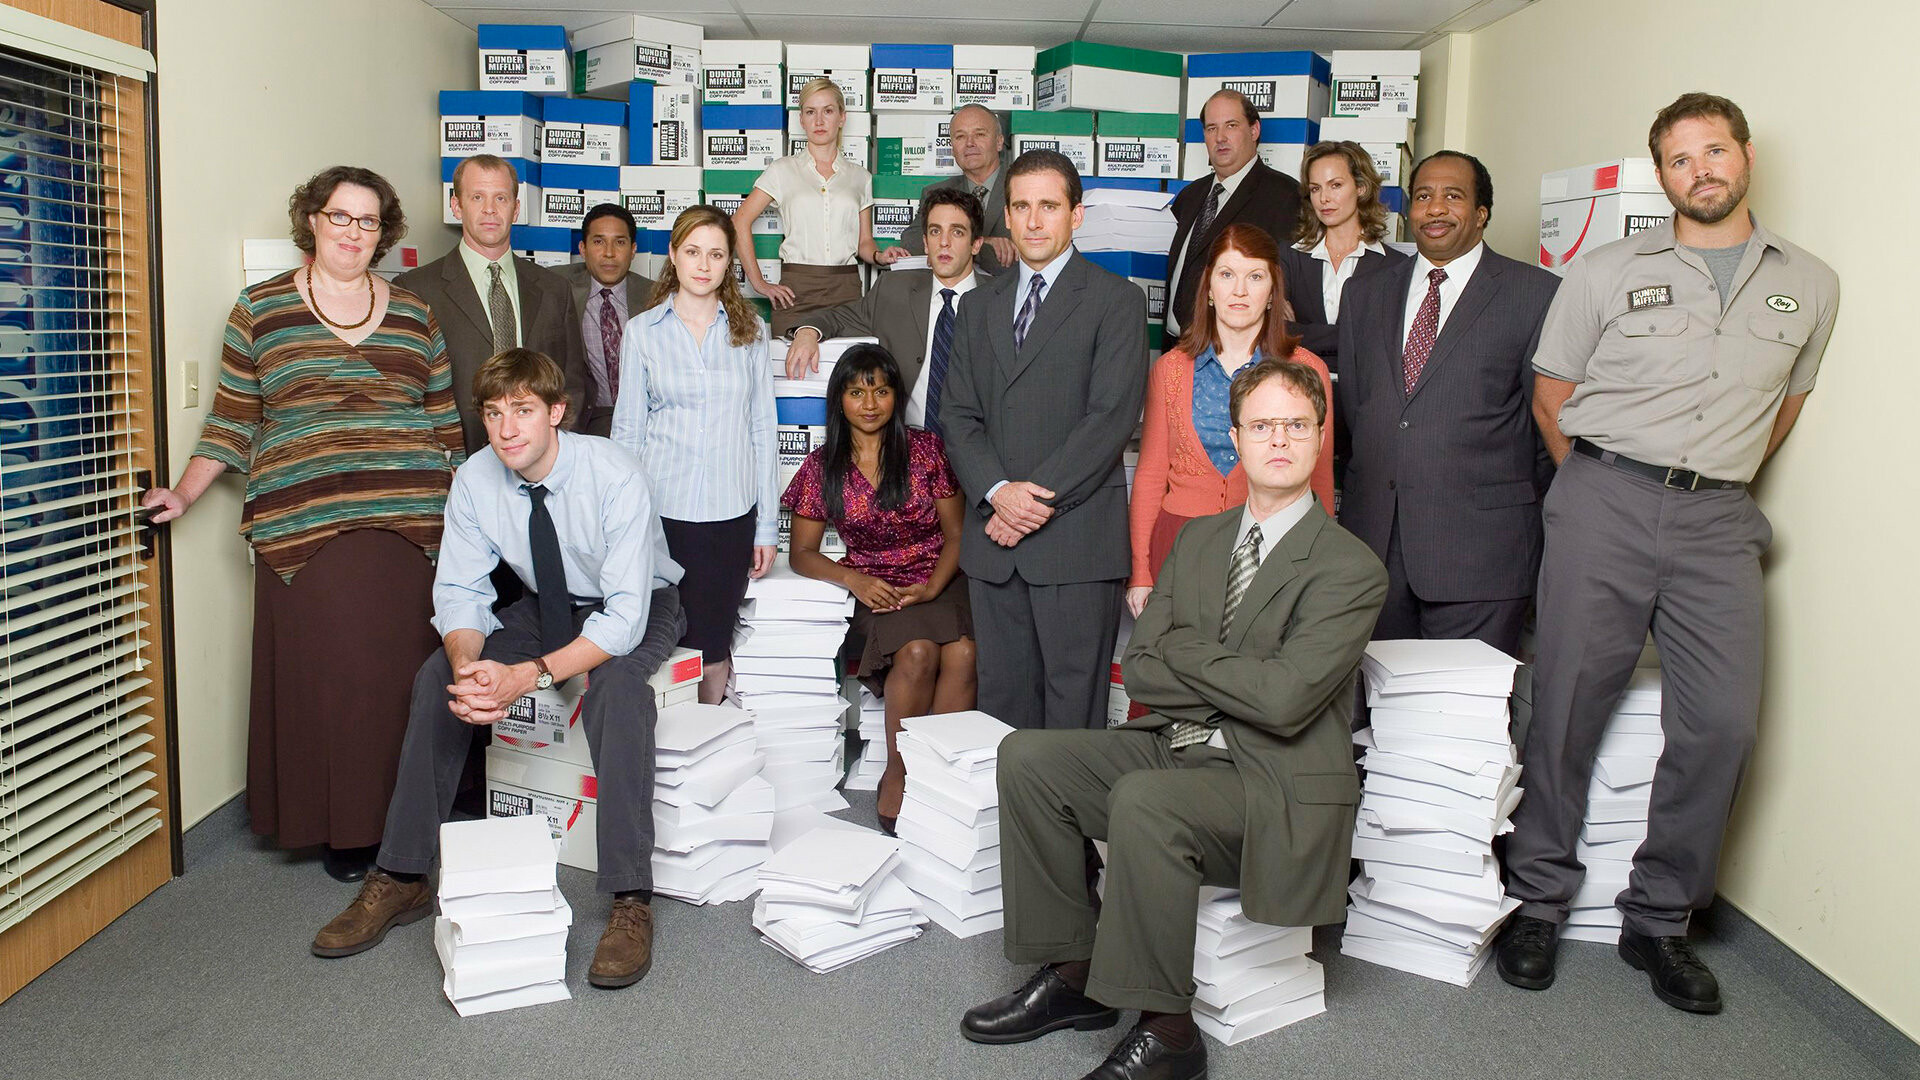 The Office (TV Series): Received four Primetime Emmy Awards, including one for Outstanding Comedy Series, in 2006. 1920x1080 Full HD Background.